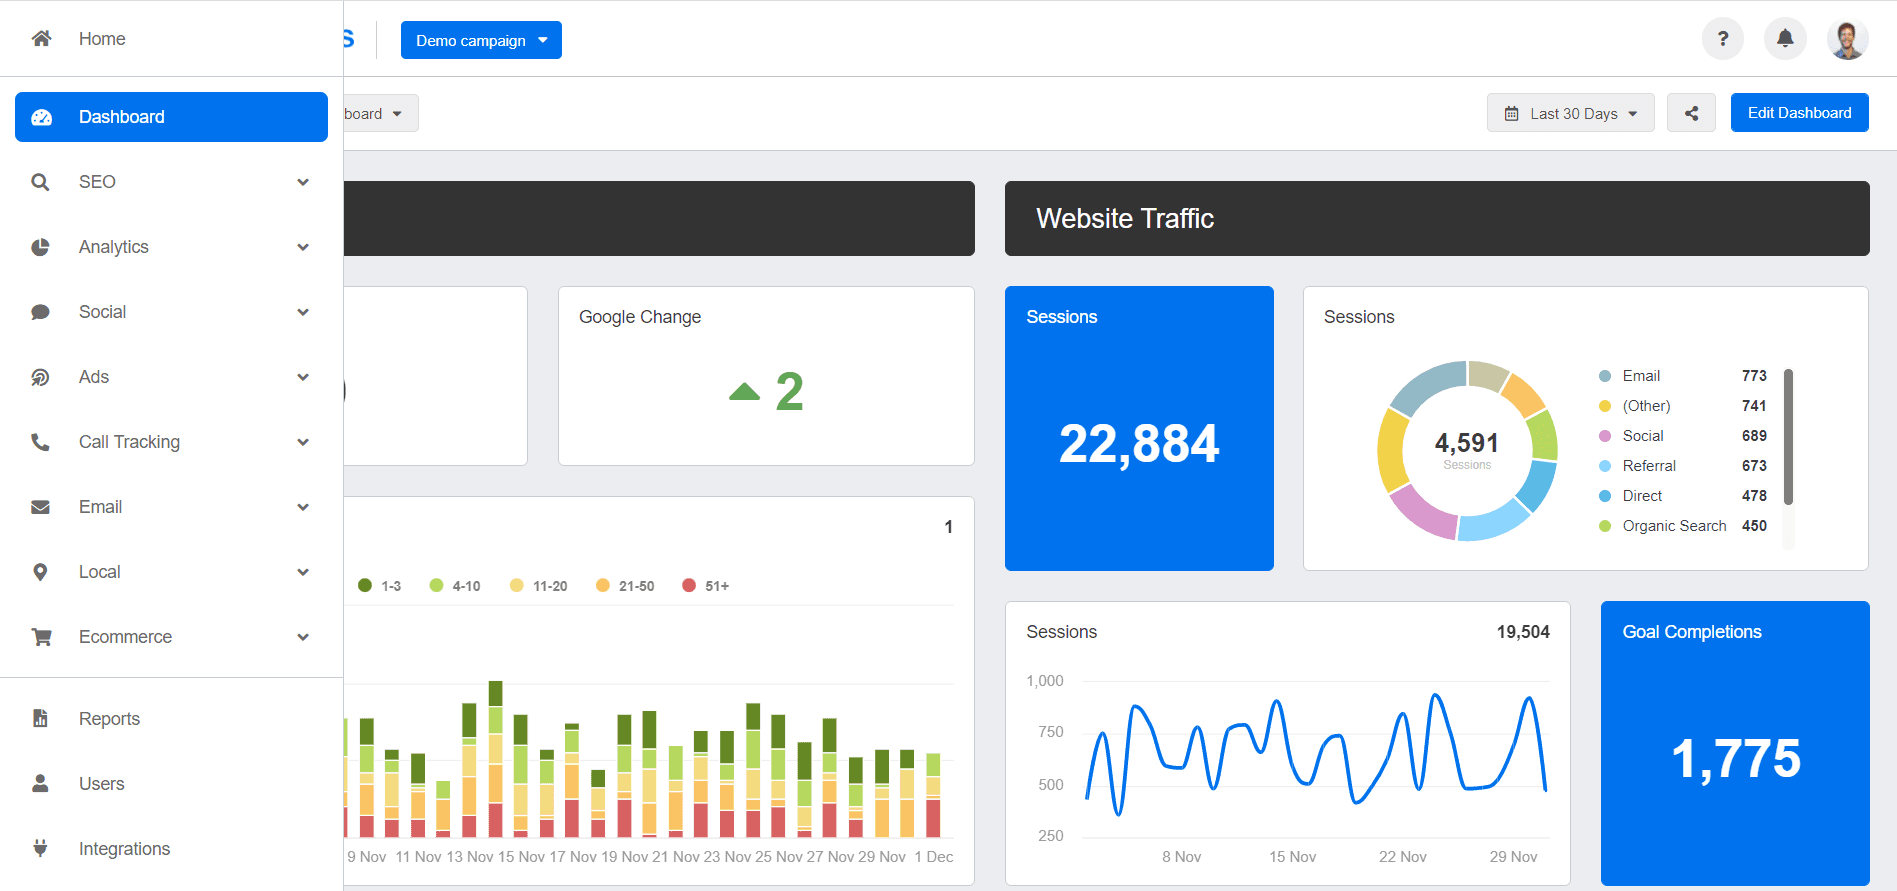 A screenshot of the refreshed AgencyAnalytics interface